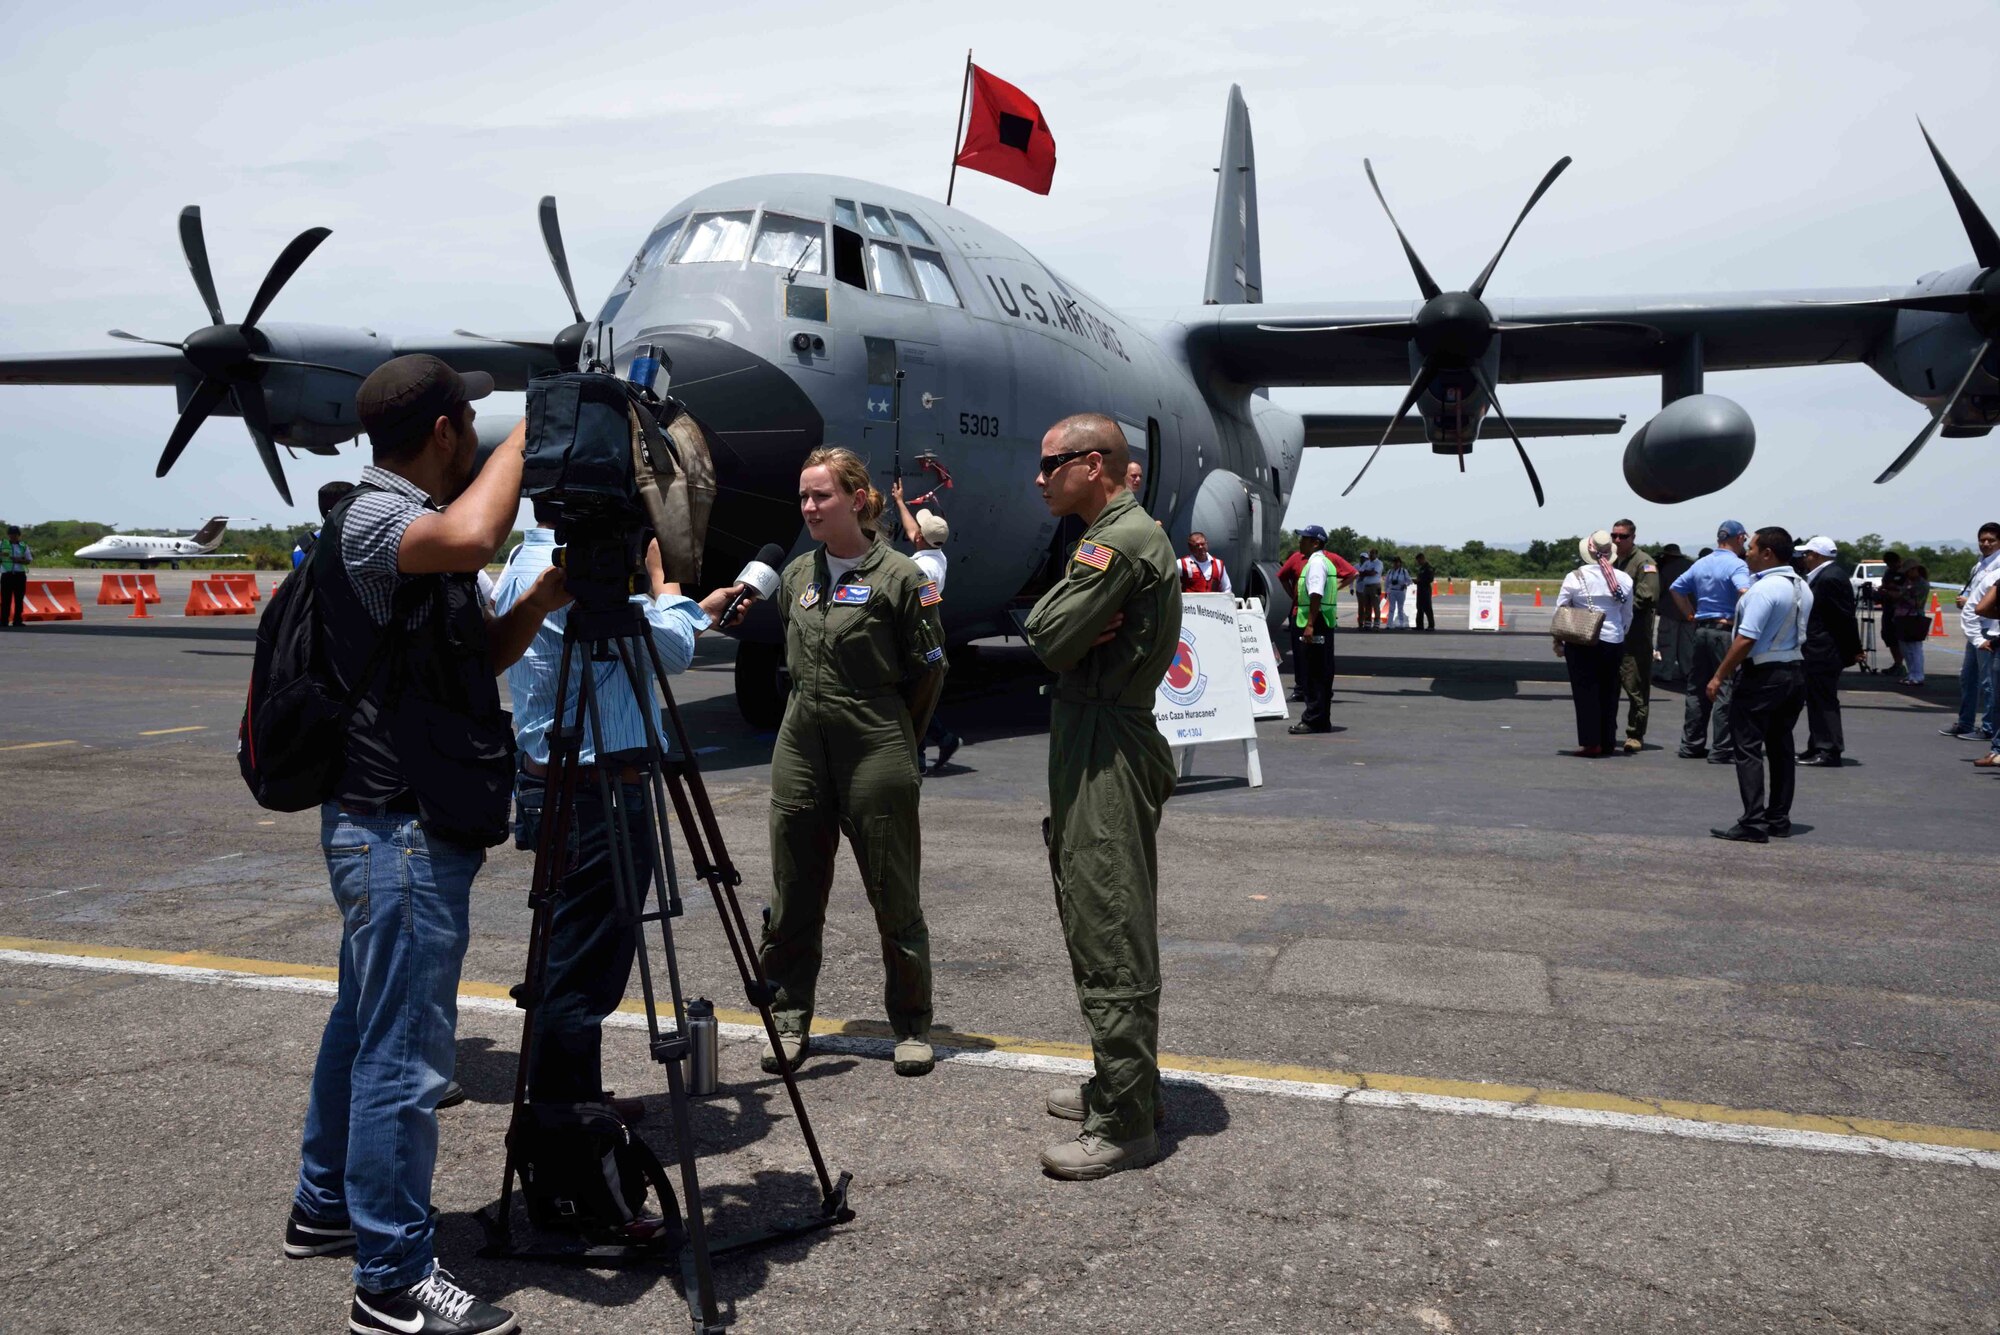 1st Lt. Leesa Froelich, 53rd Weather Reconnaissance Squadron “Hurricane Hunter” aerial reconnaissance weather officer, takes questions from local media in Puerto Vallarta, Mexico, about the mission of the Hurricane Hunters during the Caribbean Hurricane Awareness Tour April 12, 2016. The purpose of the CHAT is to raise hurricane awareness across Latin America and the Caribbean, and to maintain and expand partnerships among the National Hurricane Center, U.S. Northern Command, U.S. Air Force and neighbors in the region. (U.S. Air Force photo/Tech. Sgt. Ryan Labadens)